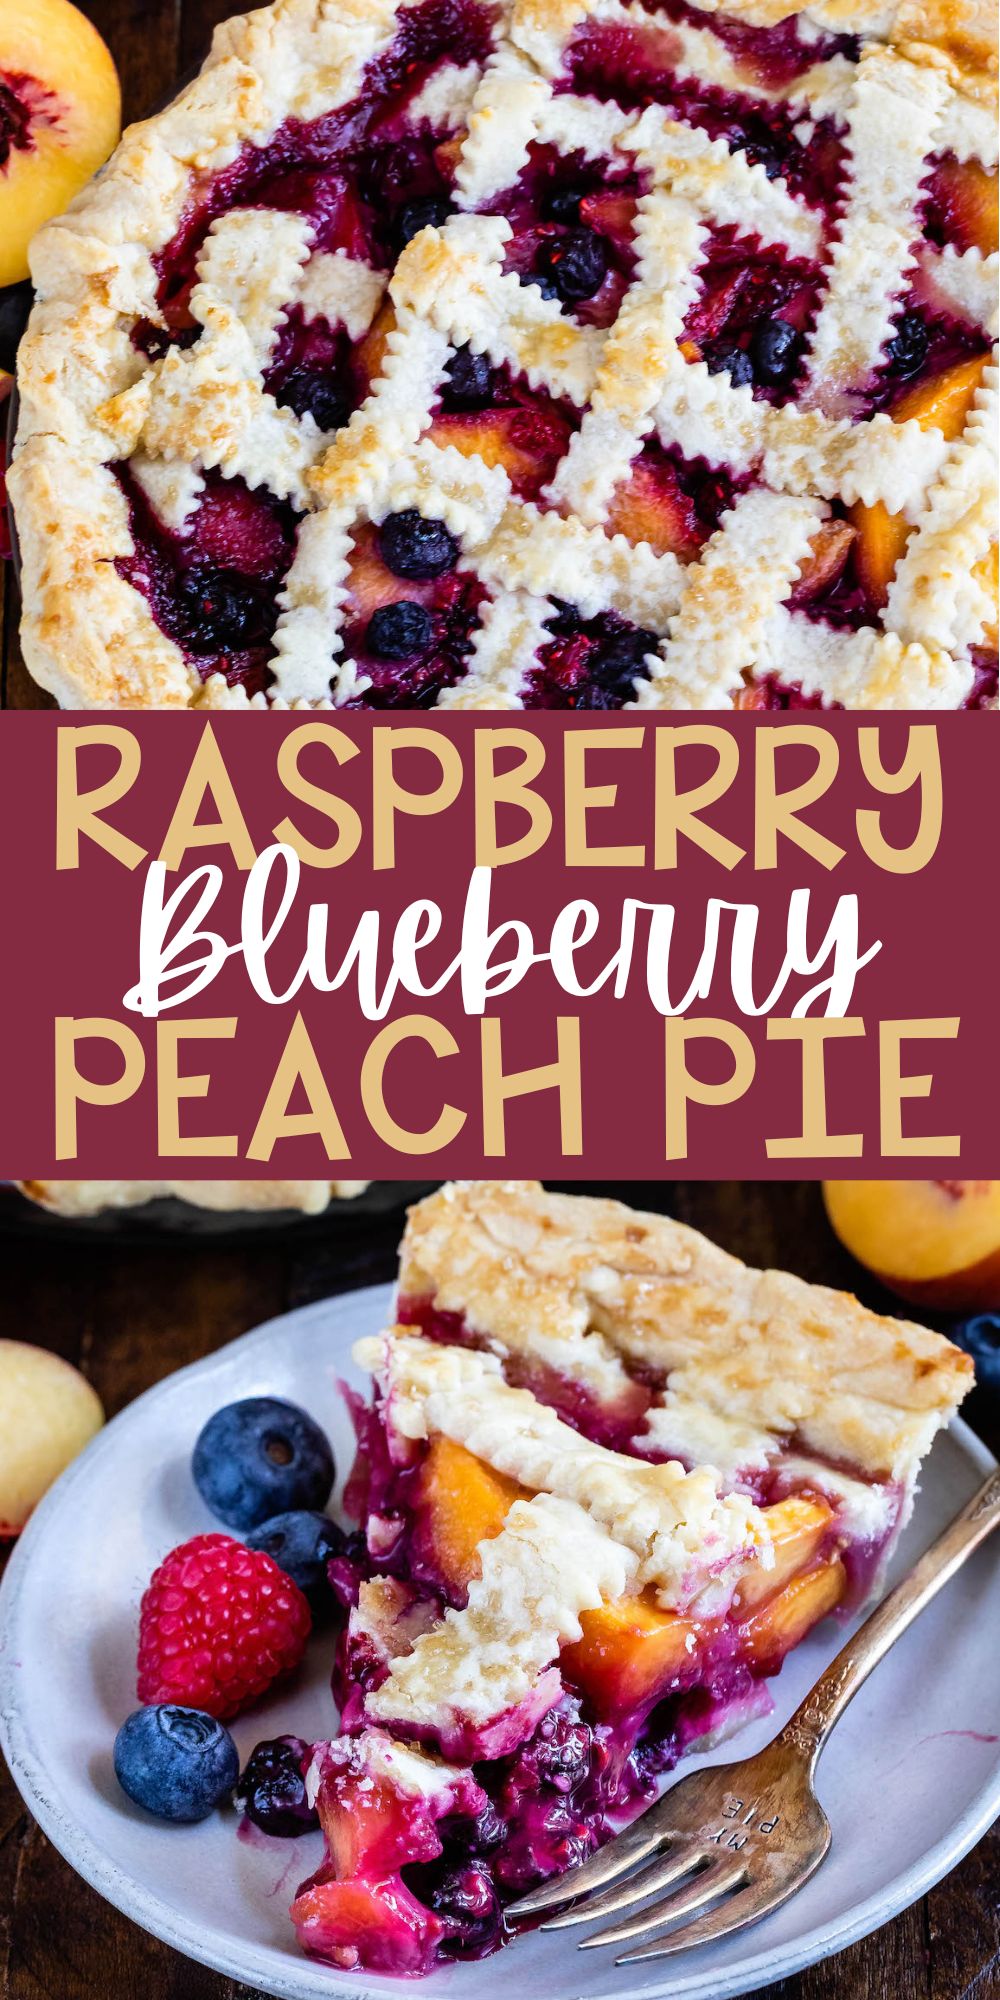 two photos of berry pie with decorative pie crust on top surrounded by slice fruit with words on the image.